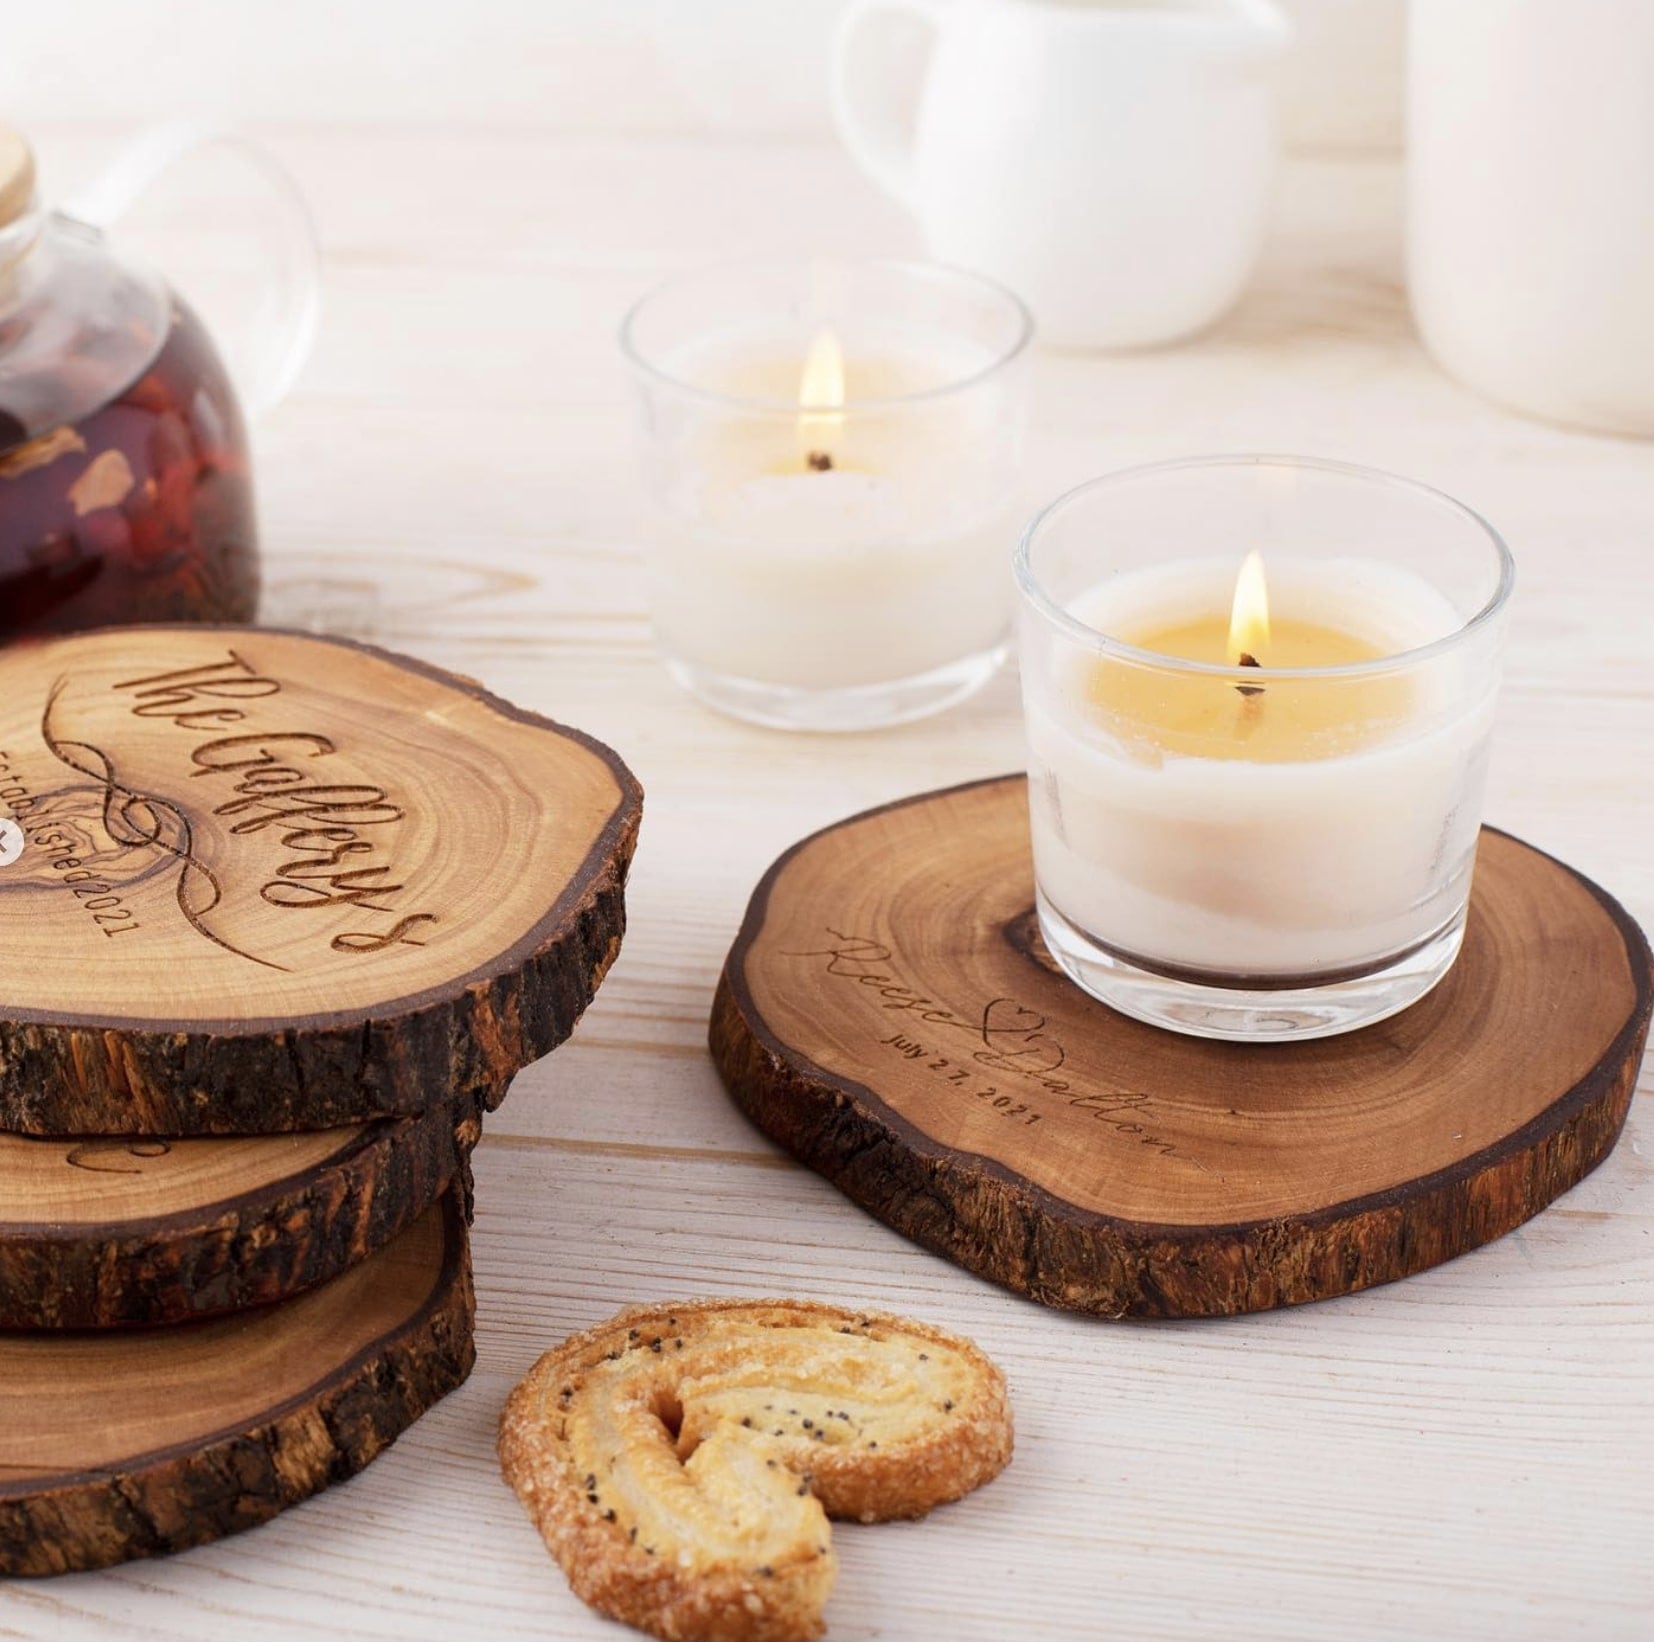 Two candles lit on wooden coasters with engraved messages, next to a teapot, on a white wooden table. a biscuit is also visible near the candles.